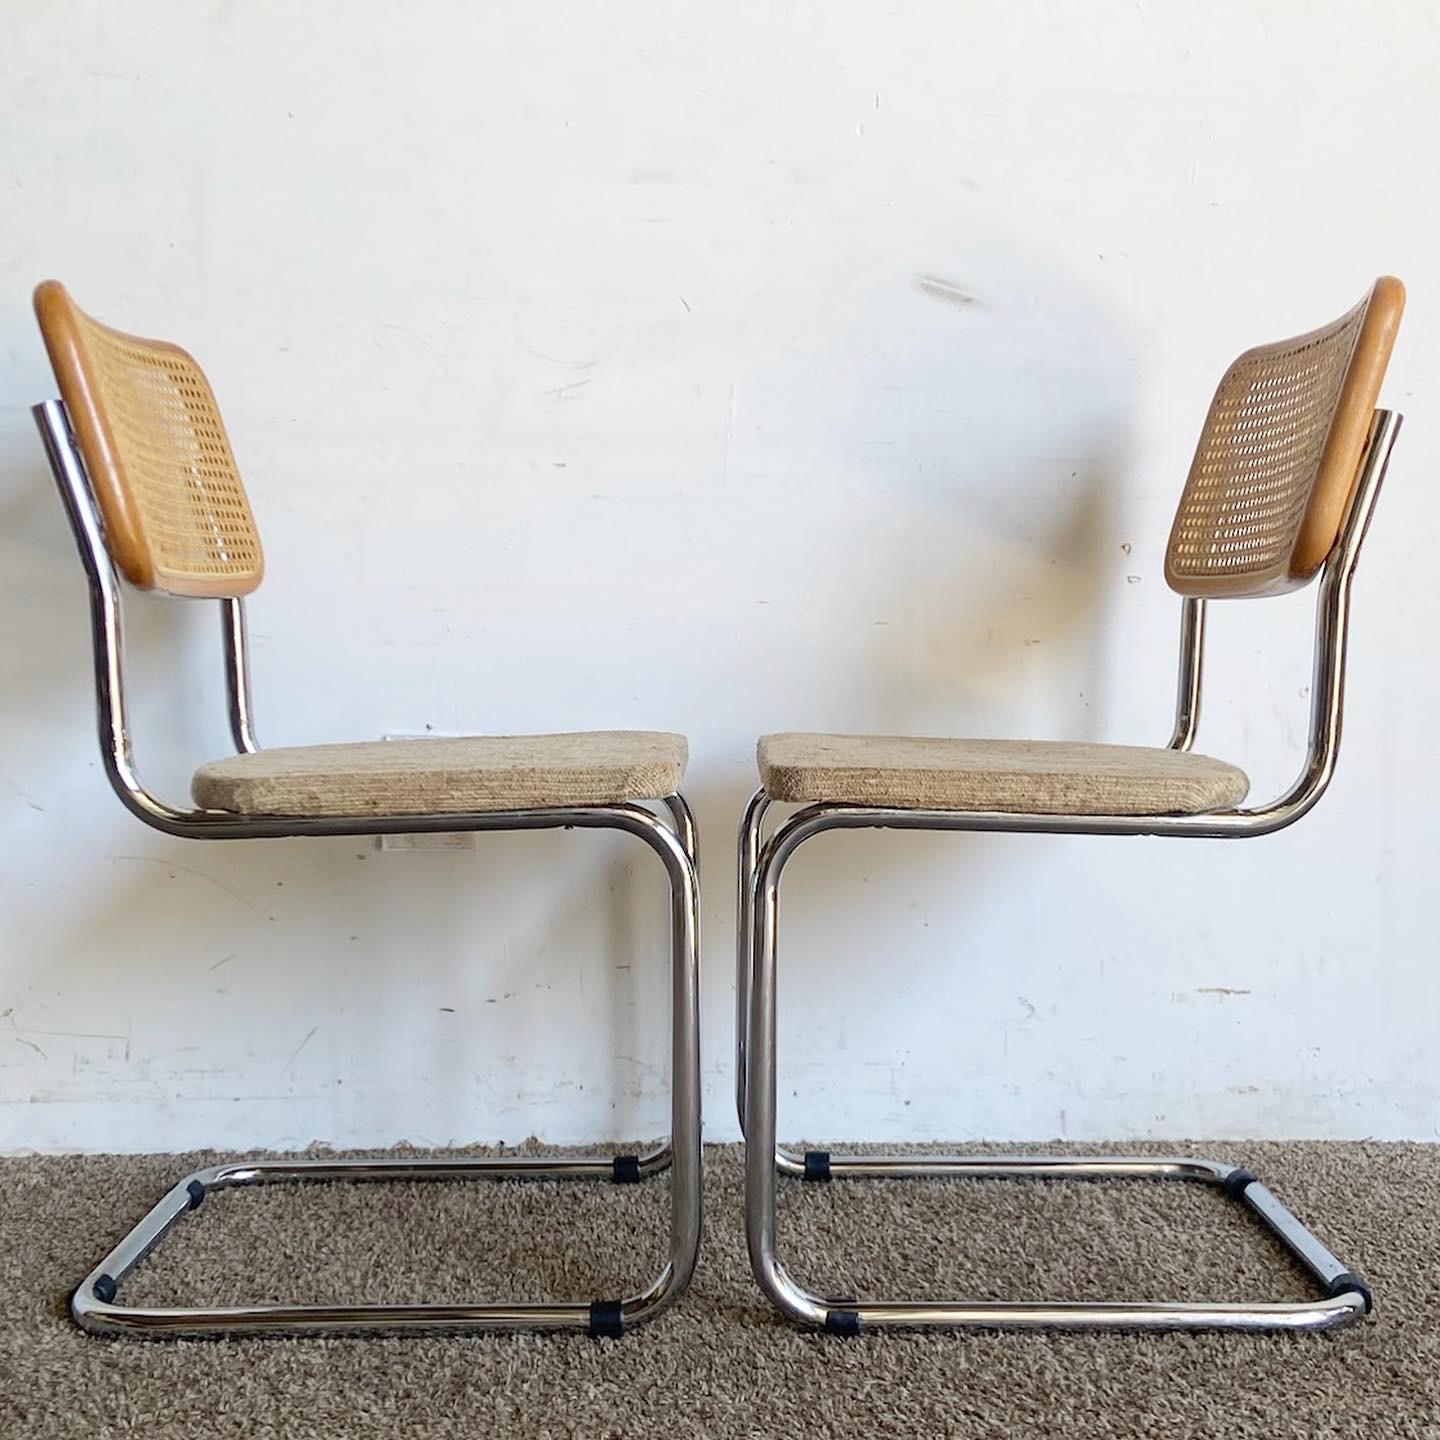 Immerse yourself in mid-century design with this set of four Marcel Breuer Style Cane and Chrome Cantilever Dining Chairs. These chairs feature chrome cantilever frames, cane backrests, and beige fabric seats, offering a perfect blend of comfort and